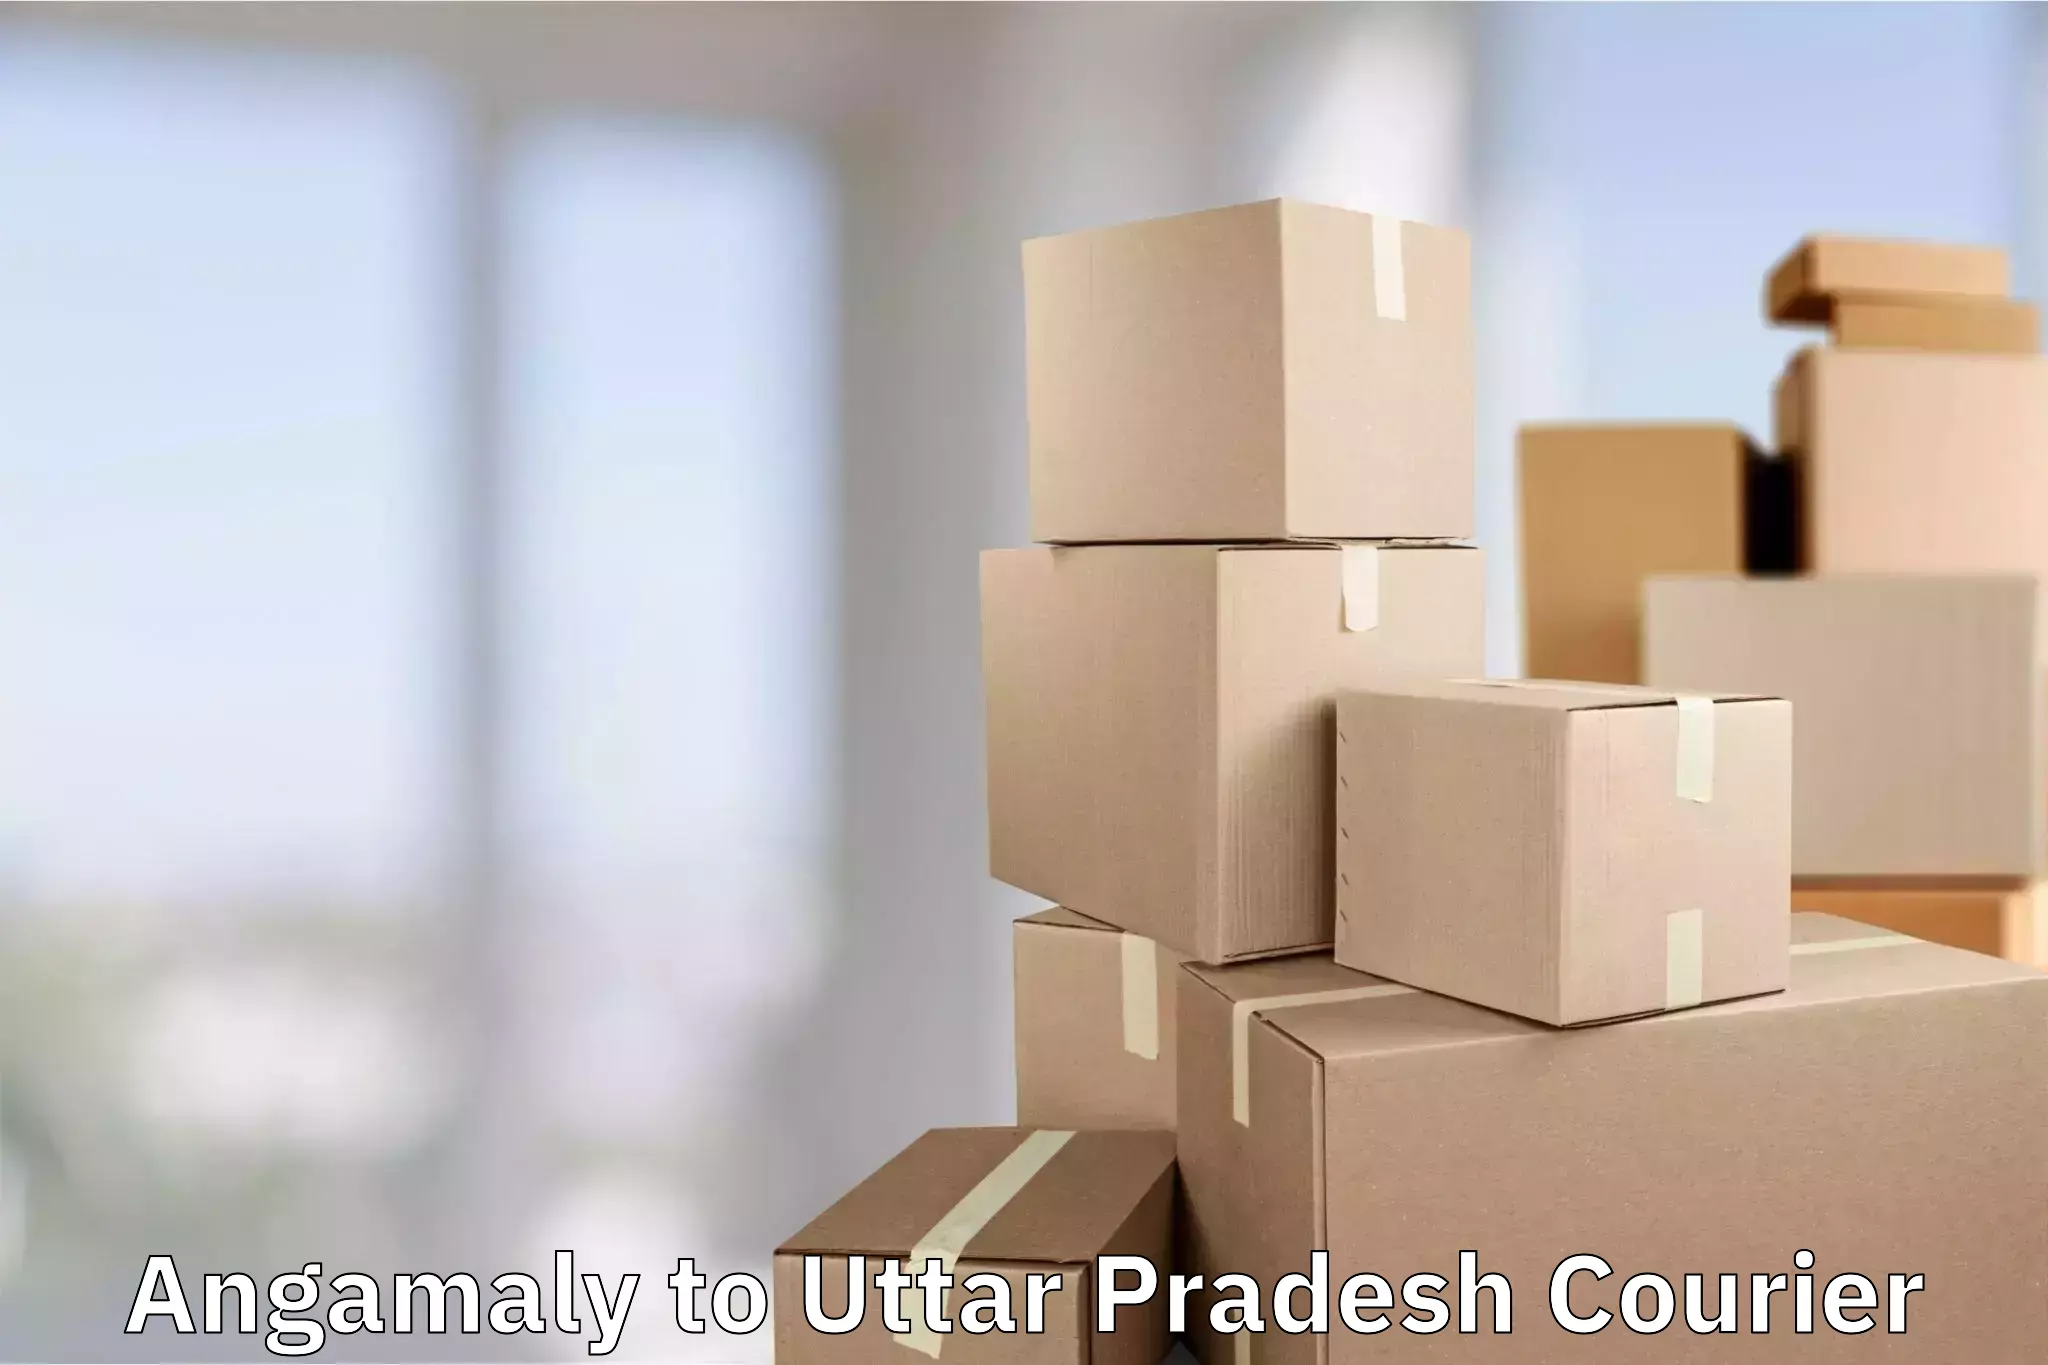 Online luggage shipping Angamaly to Agra